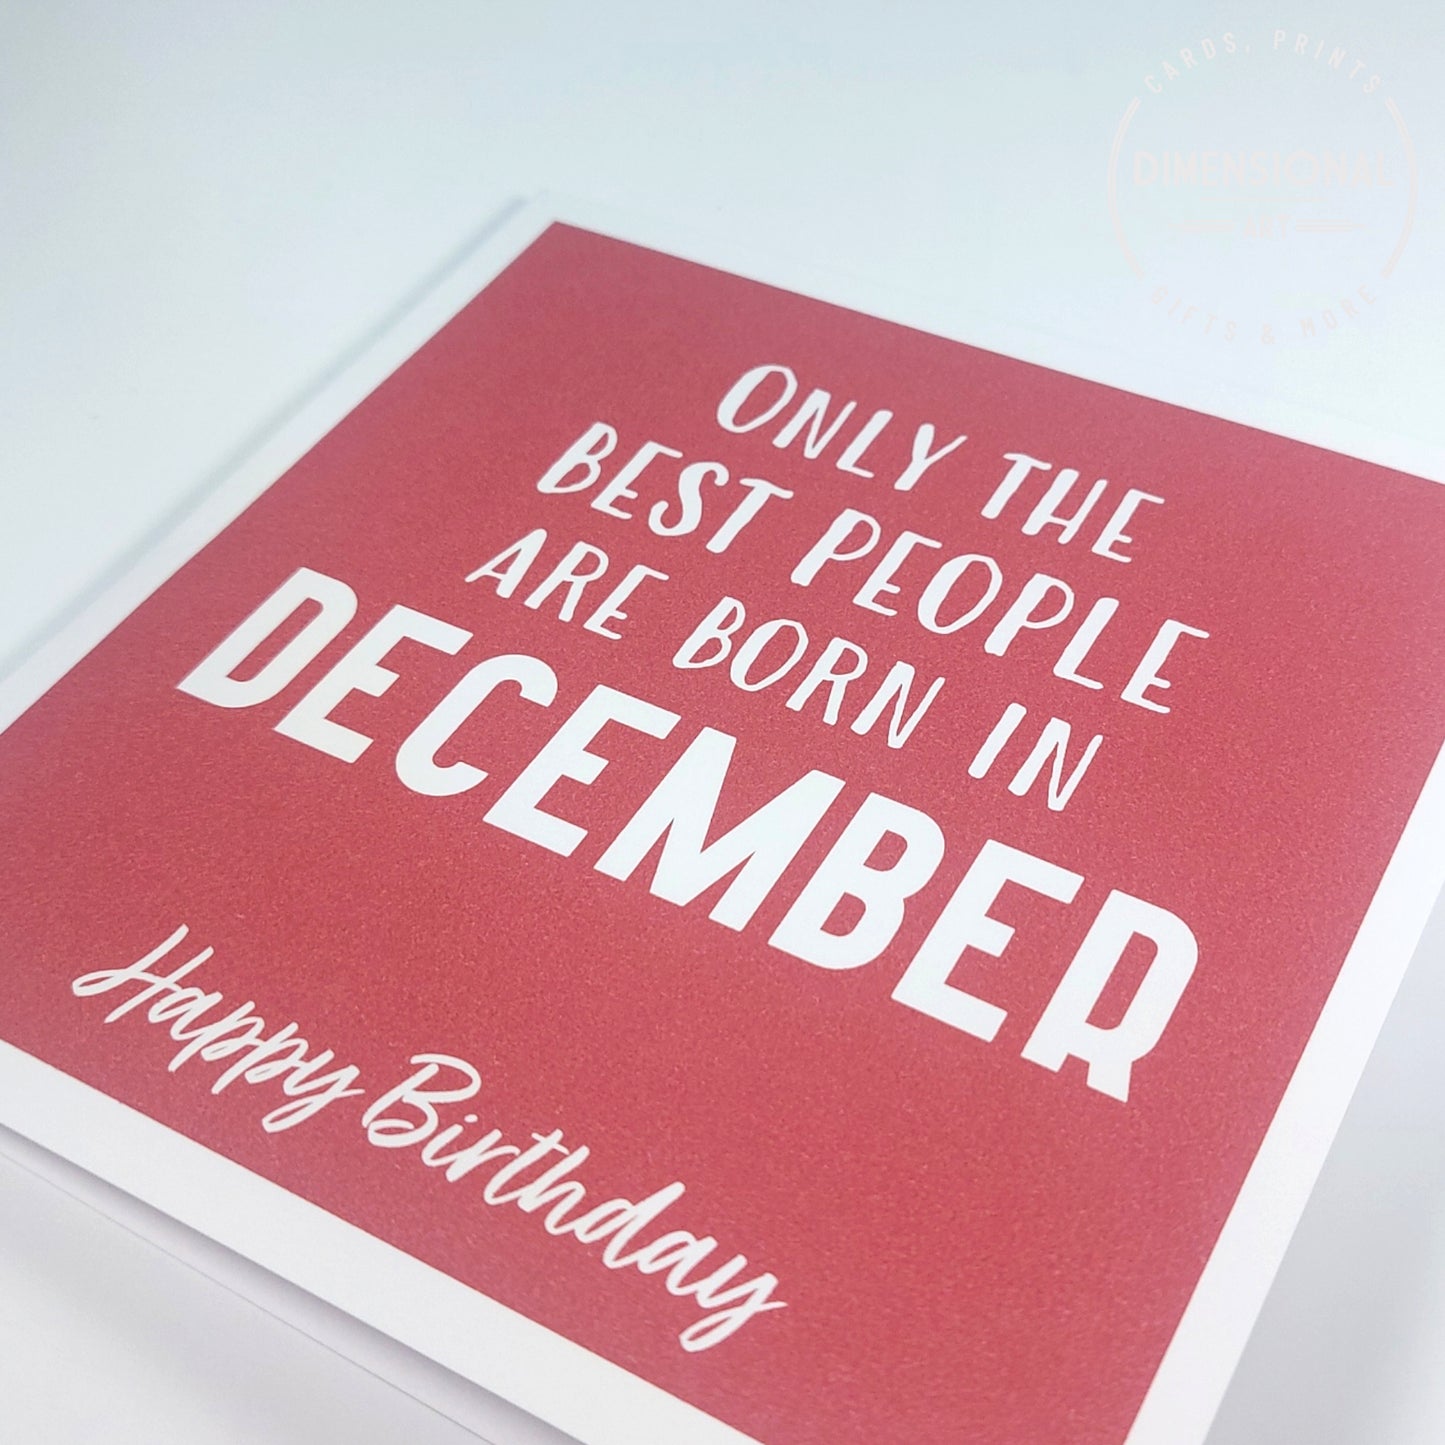 Best people are born in DECEMBER - Birthday Card